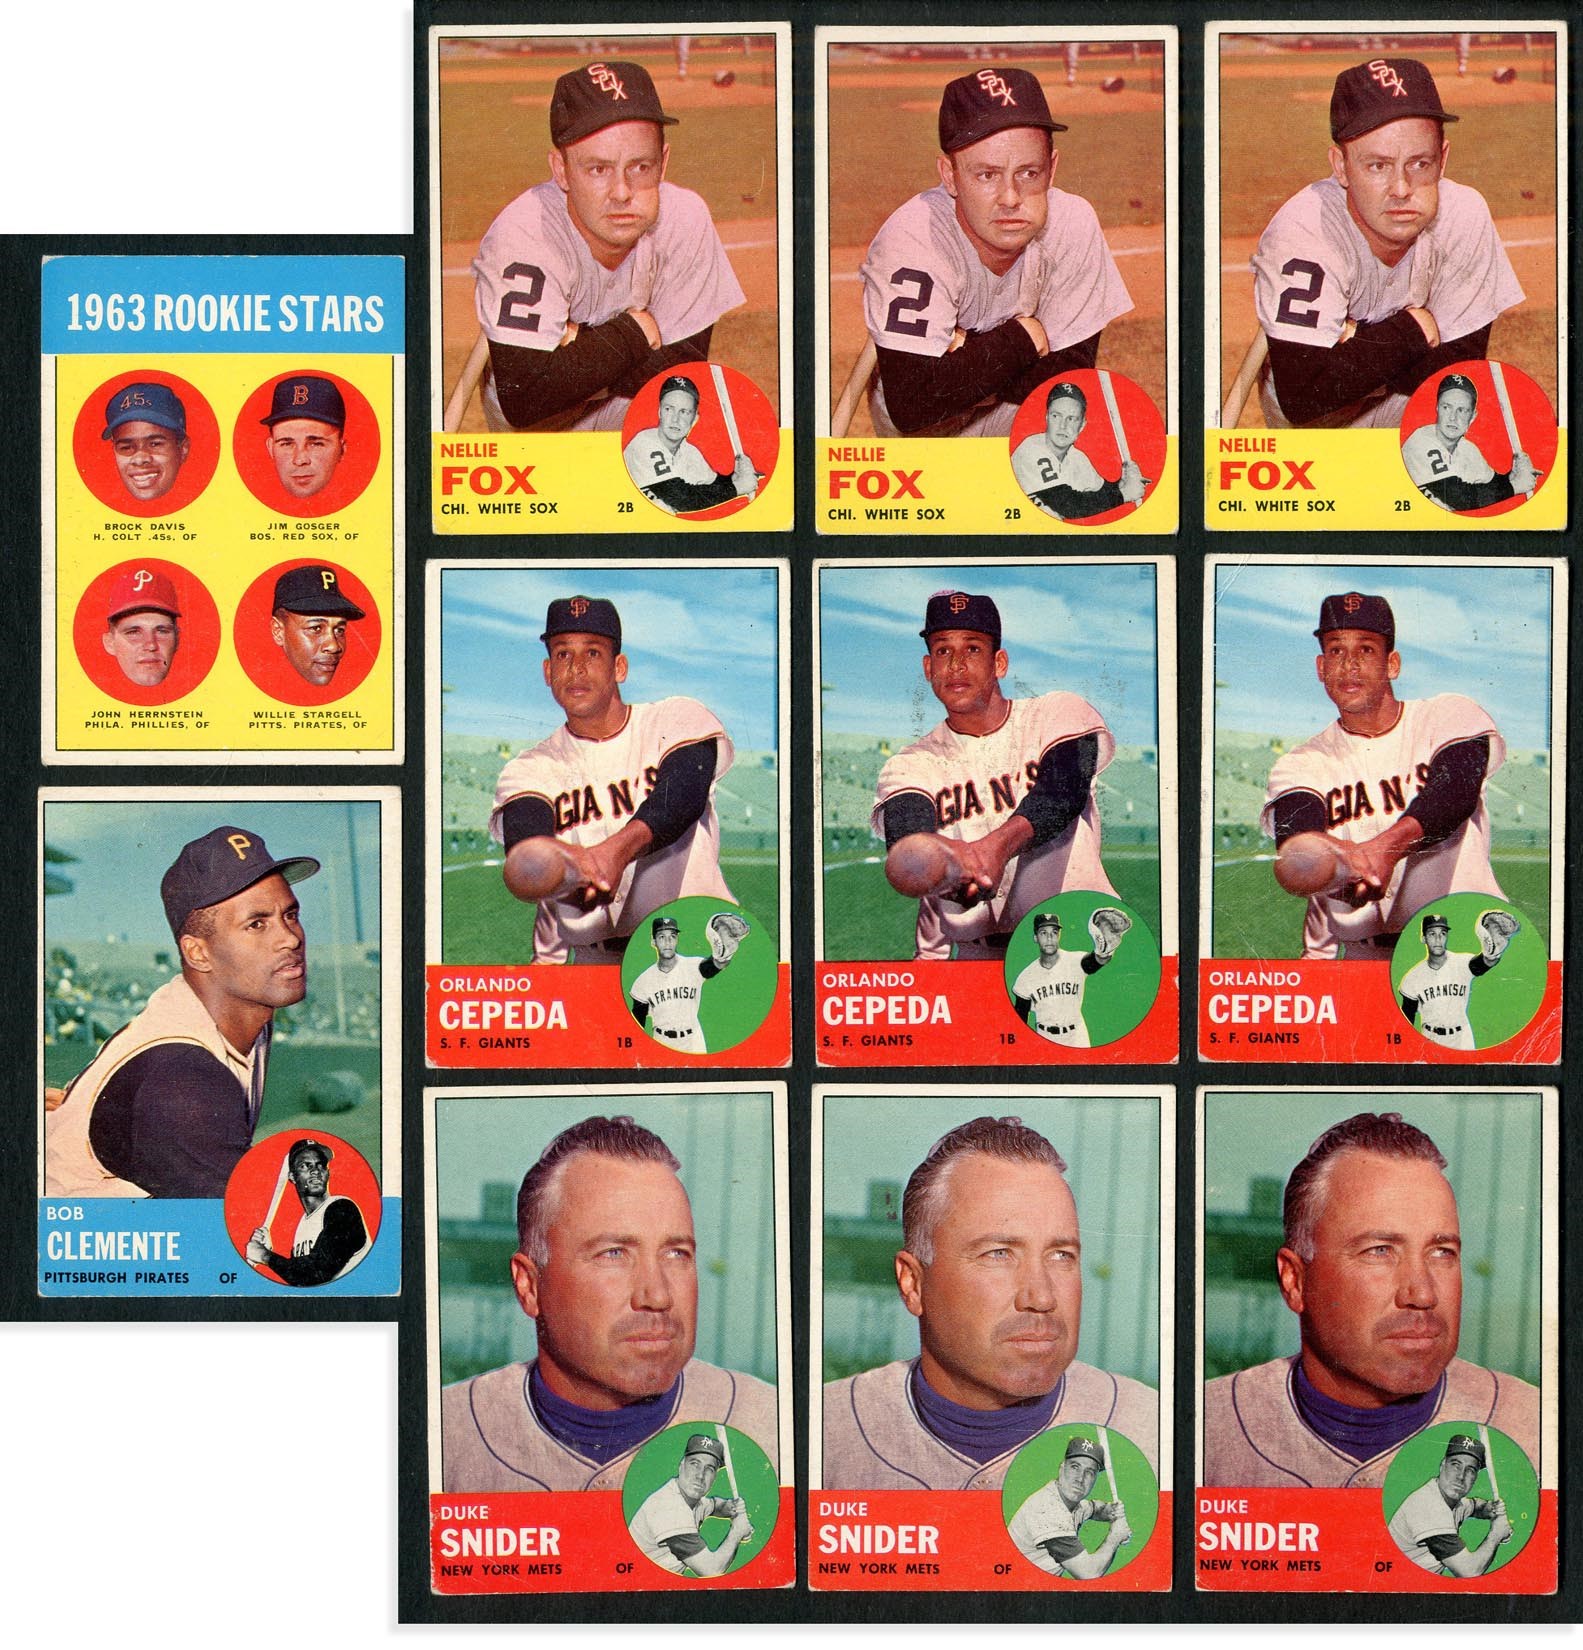 Baseball and Trading Cards - 1963 Topps Baseball Partial Set and Dupes with Stars (475+ Cards)